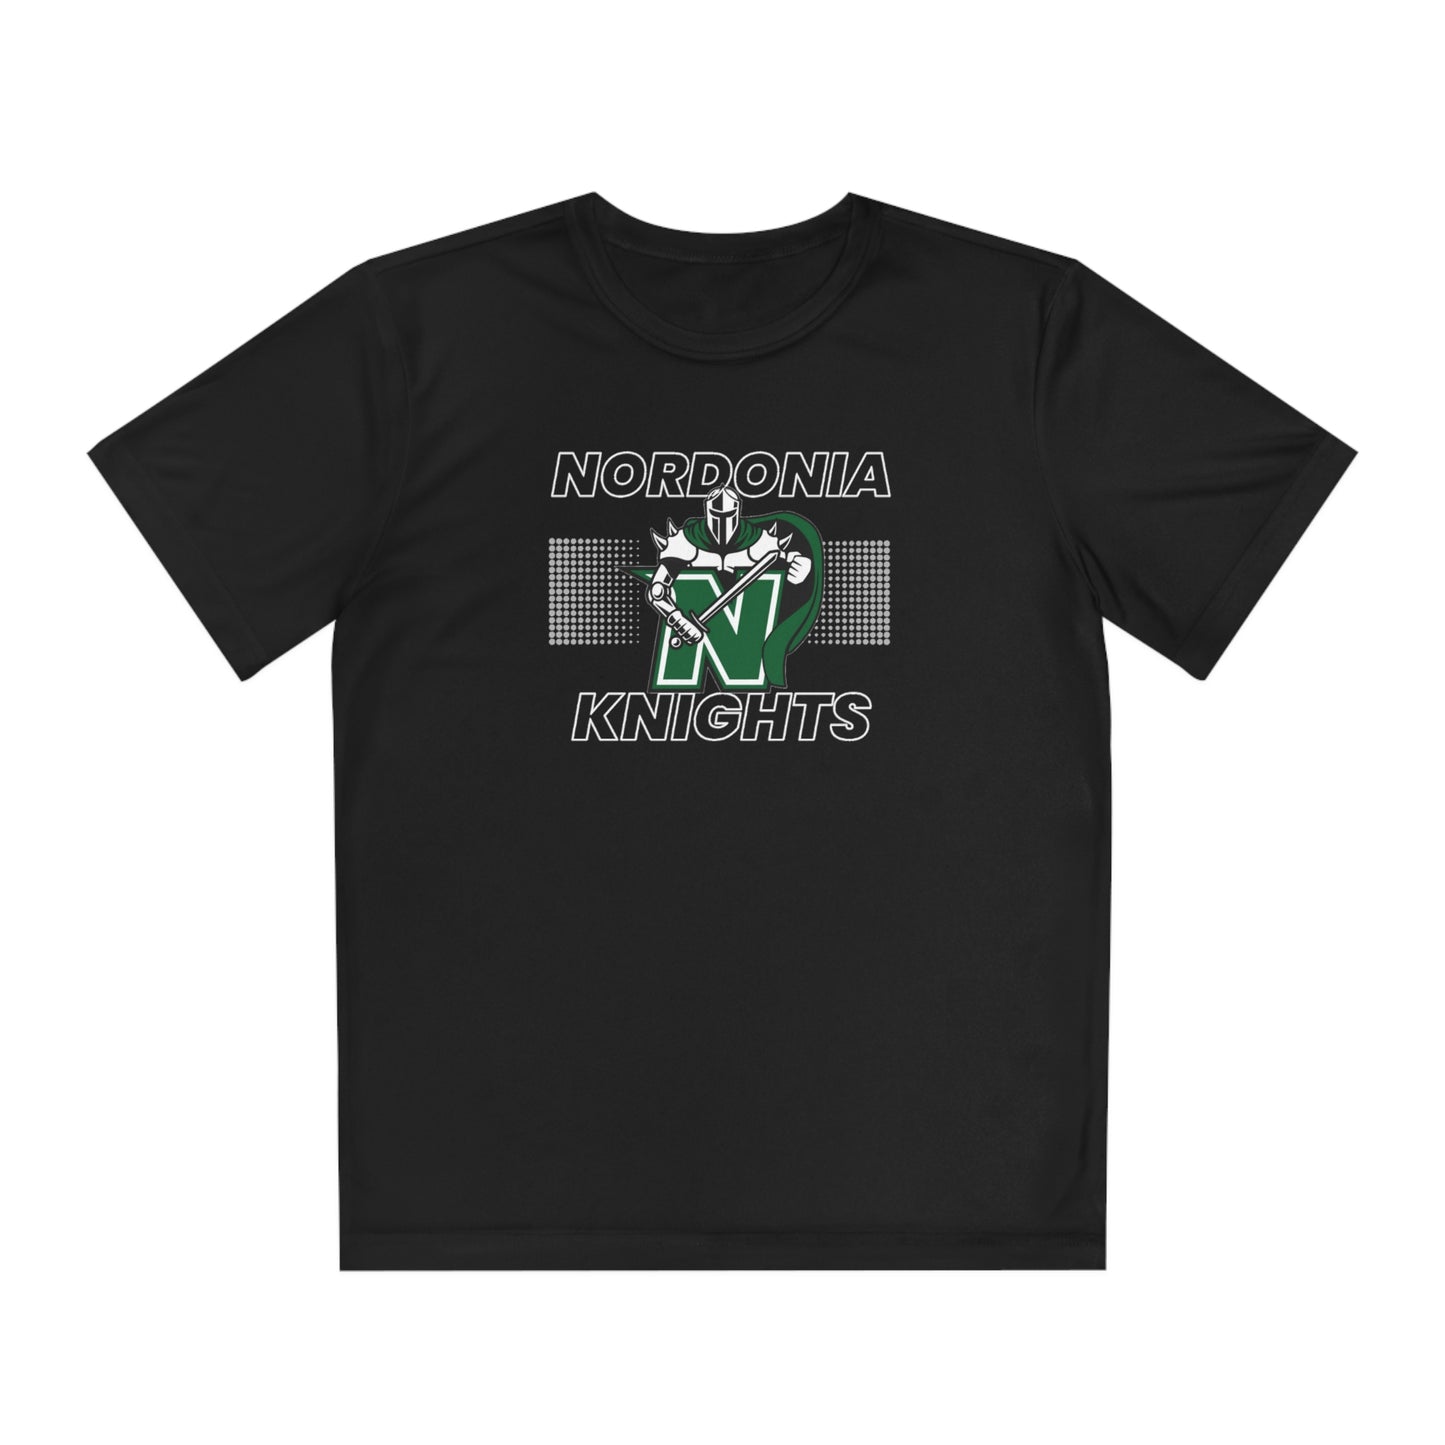 Youth Competitor Performance Logo Short Sleeve Graphic Tee - Nordonia Knights